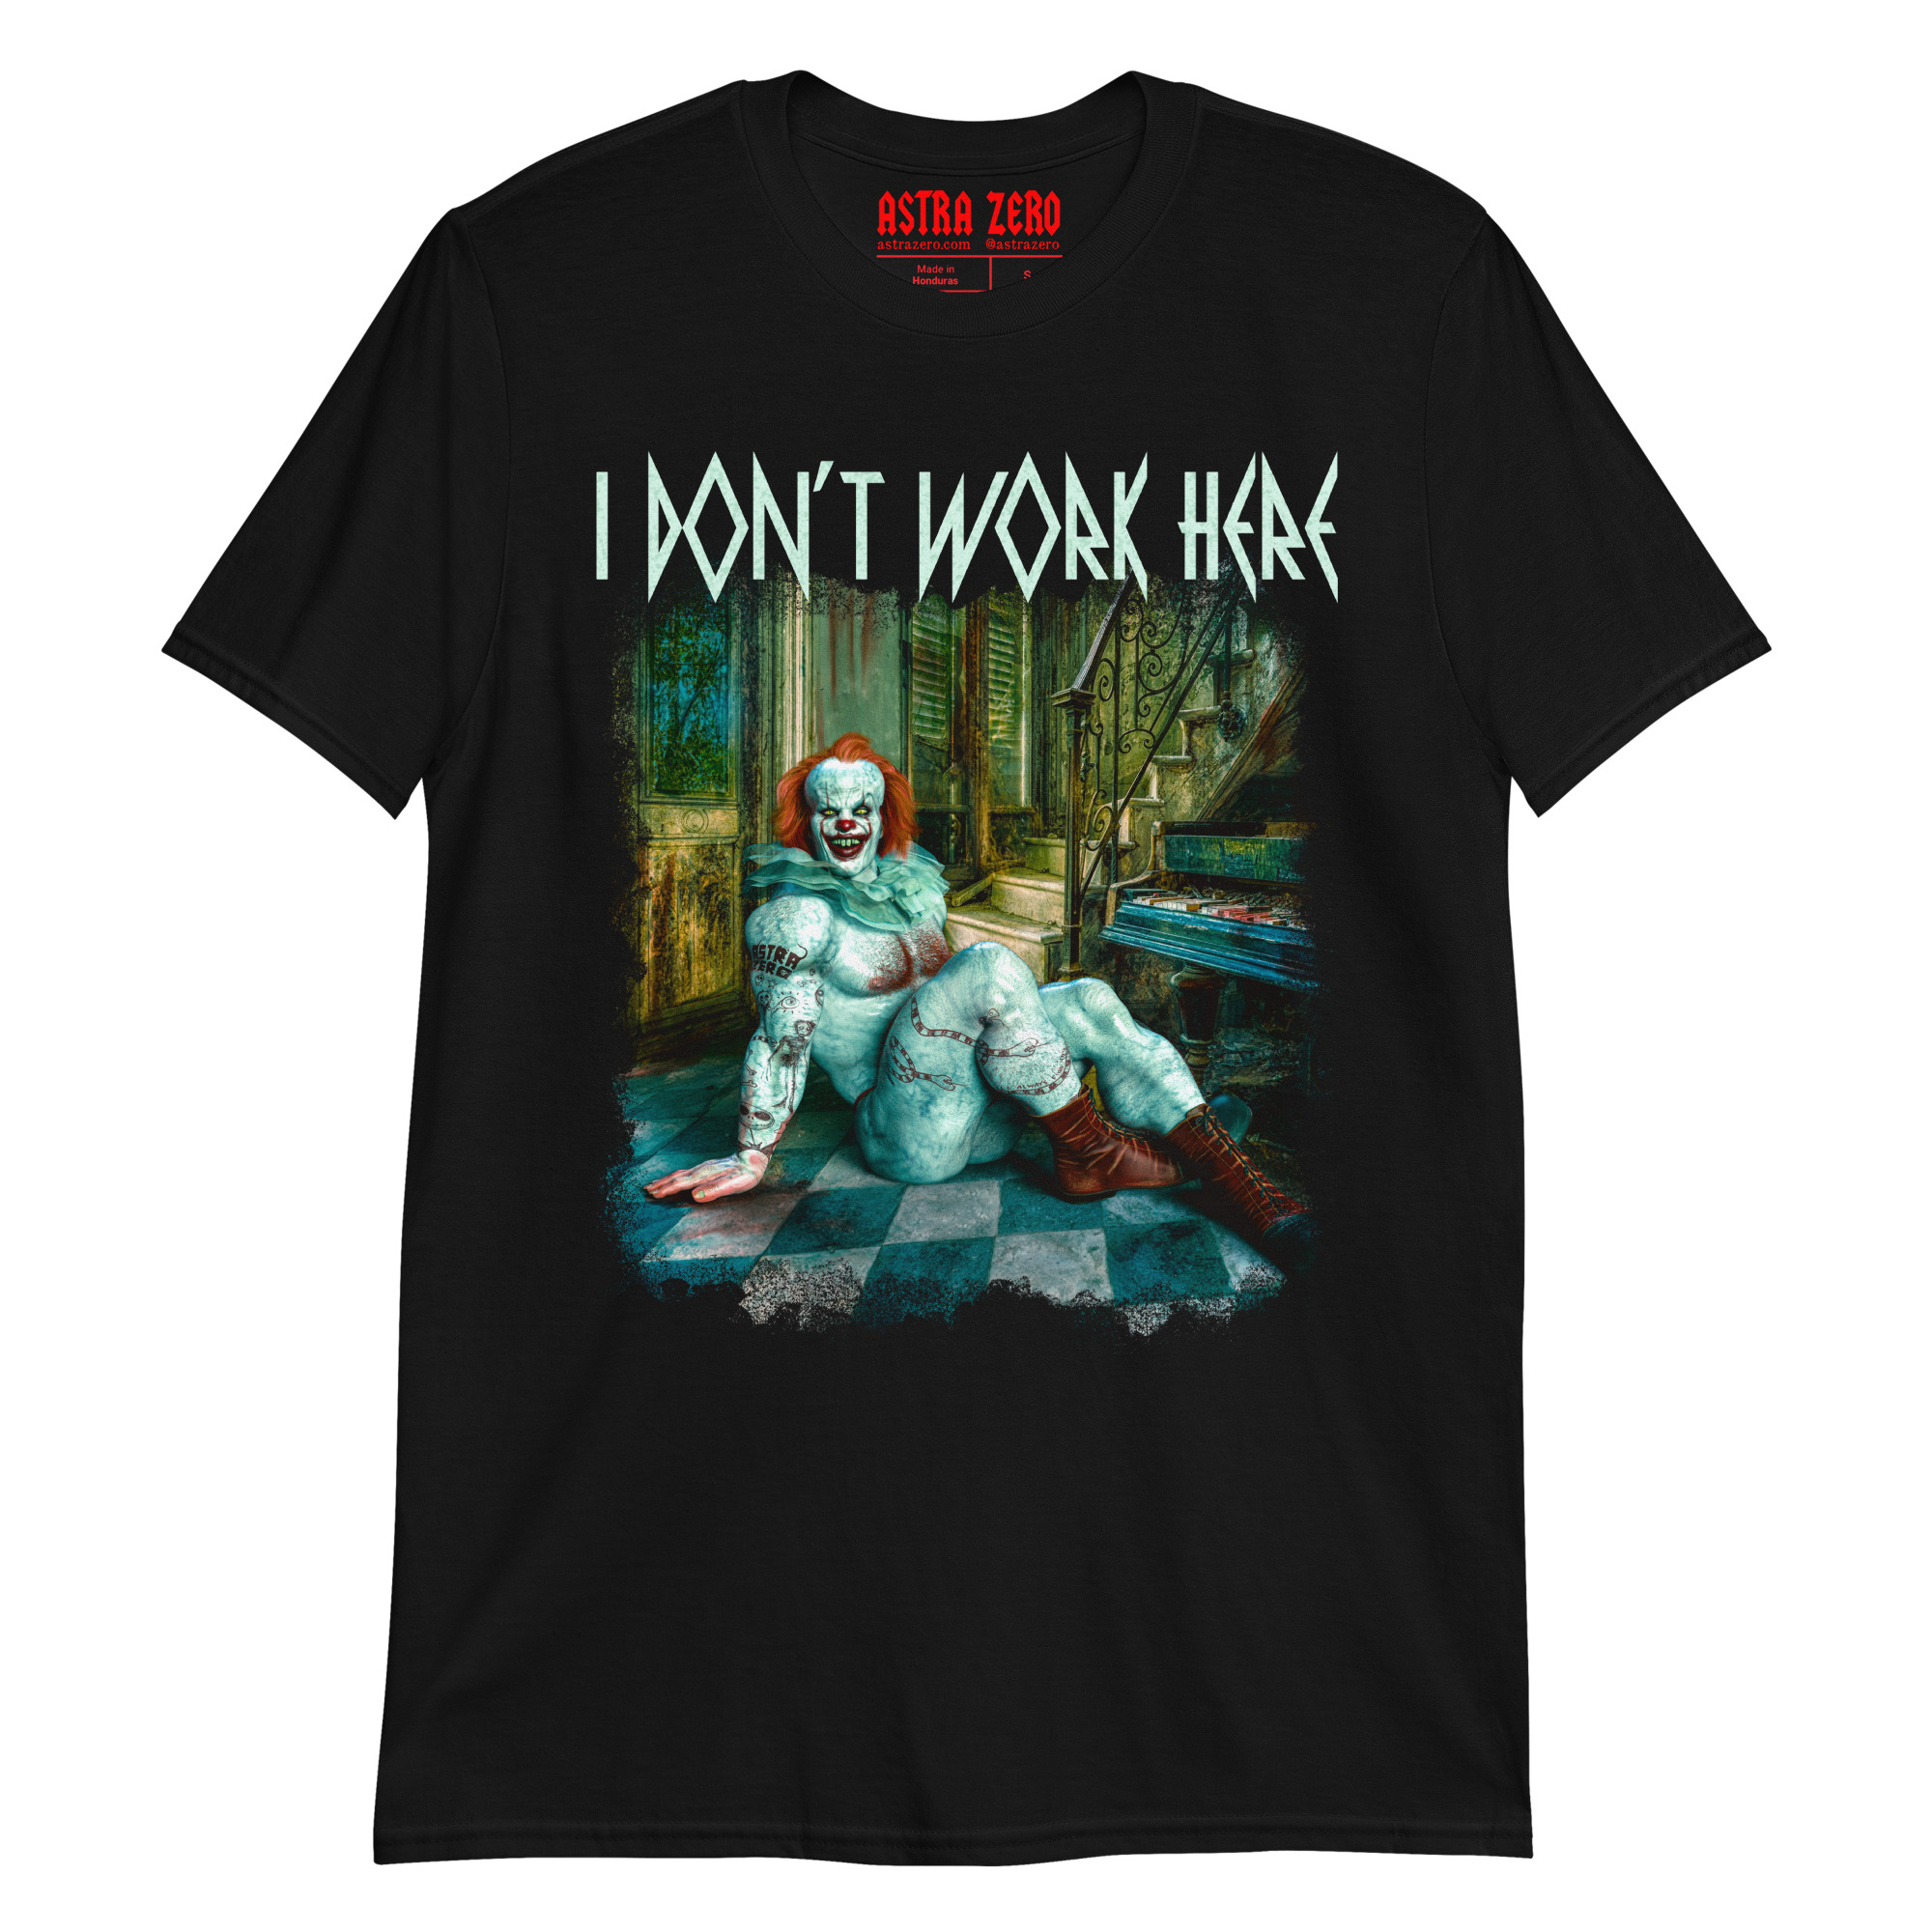 Featured image for “I Don’t Work Here - Short-Sleeve Unisex T-Shirt”